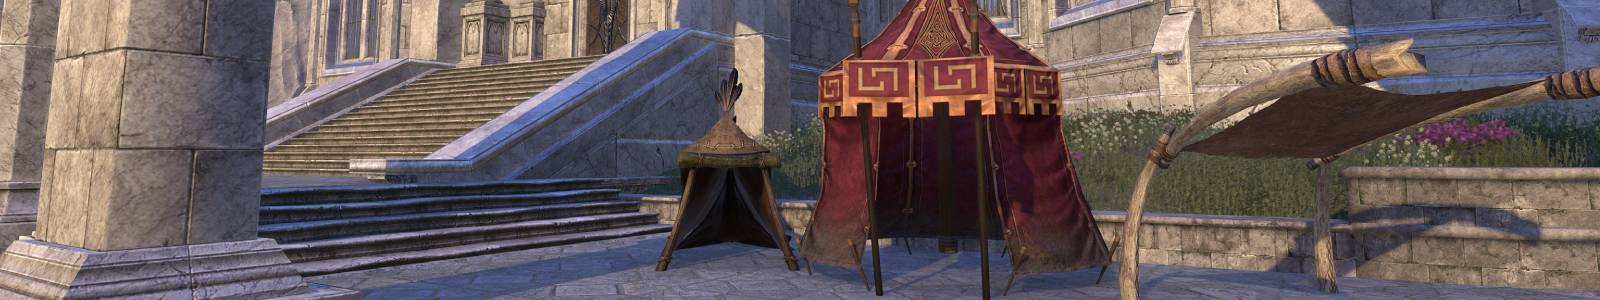 Redguard Tent, Rounded Silk - ESO header